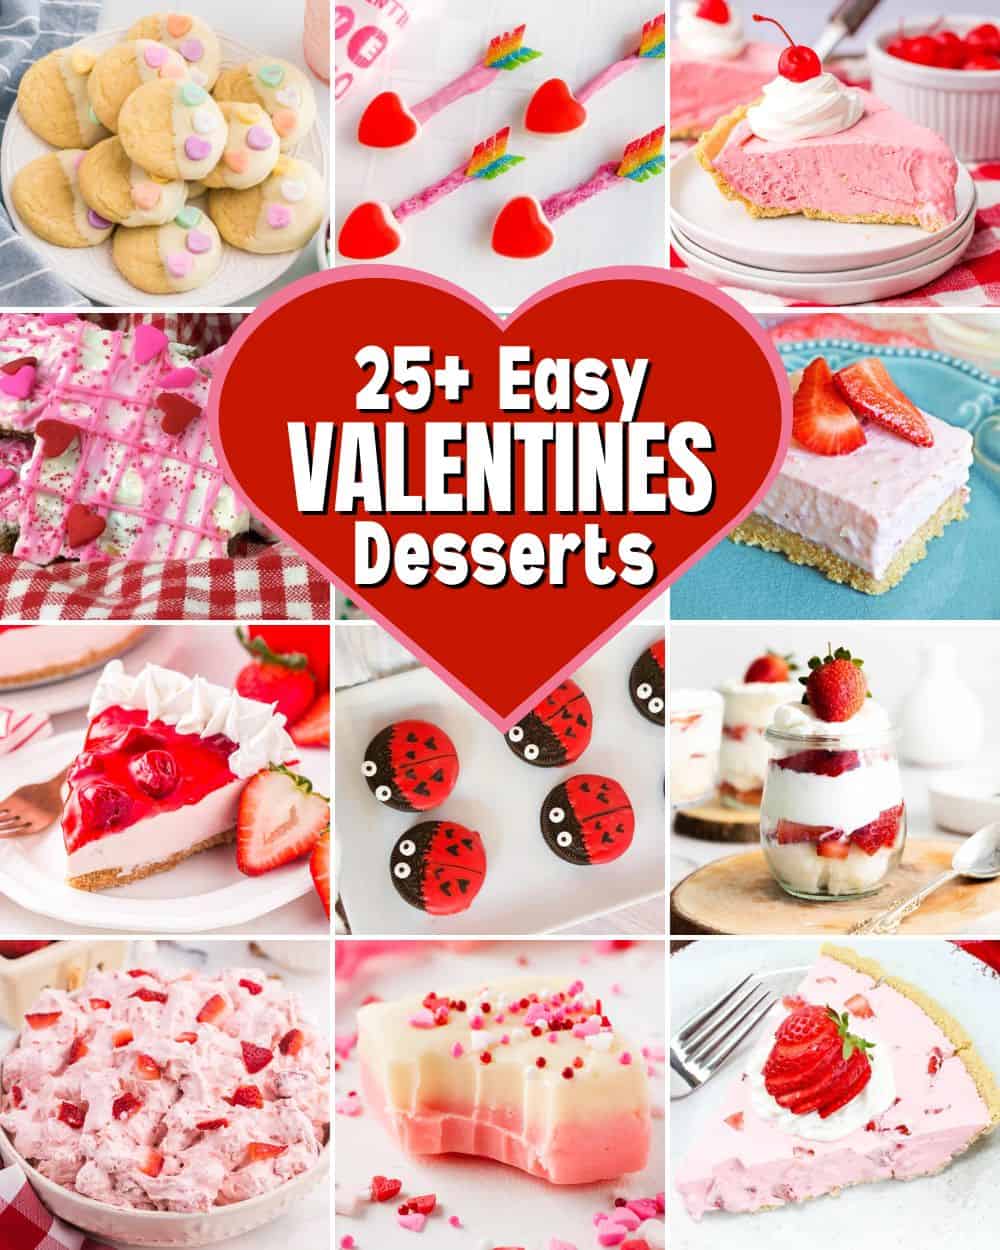 25+ Easy Valentines Desserts recipe collage featuring no bake pies, fruit desserts, cookies, and more.